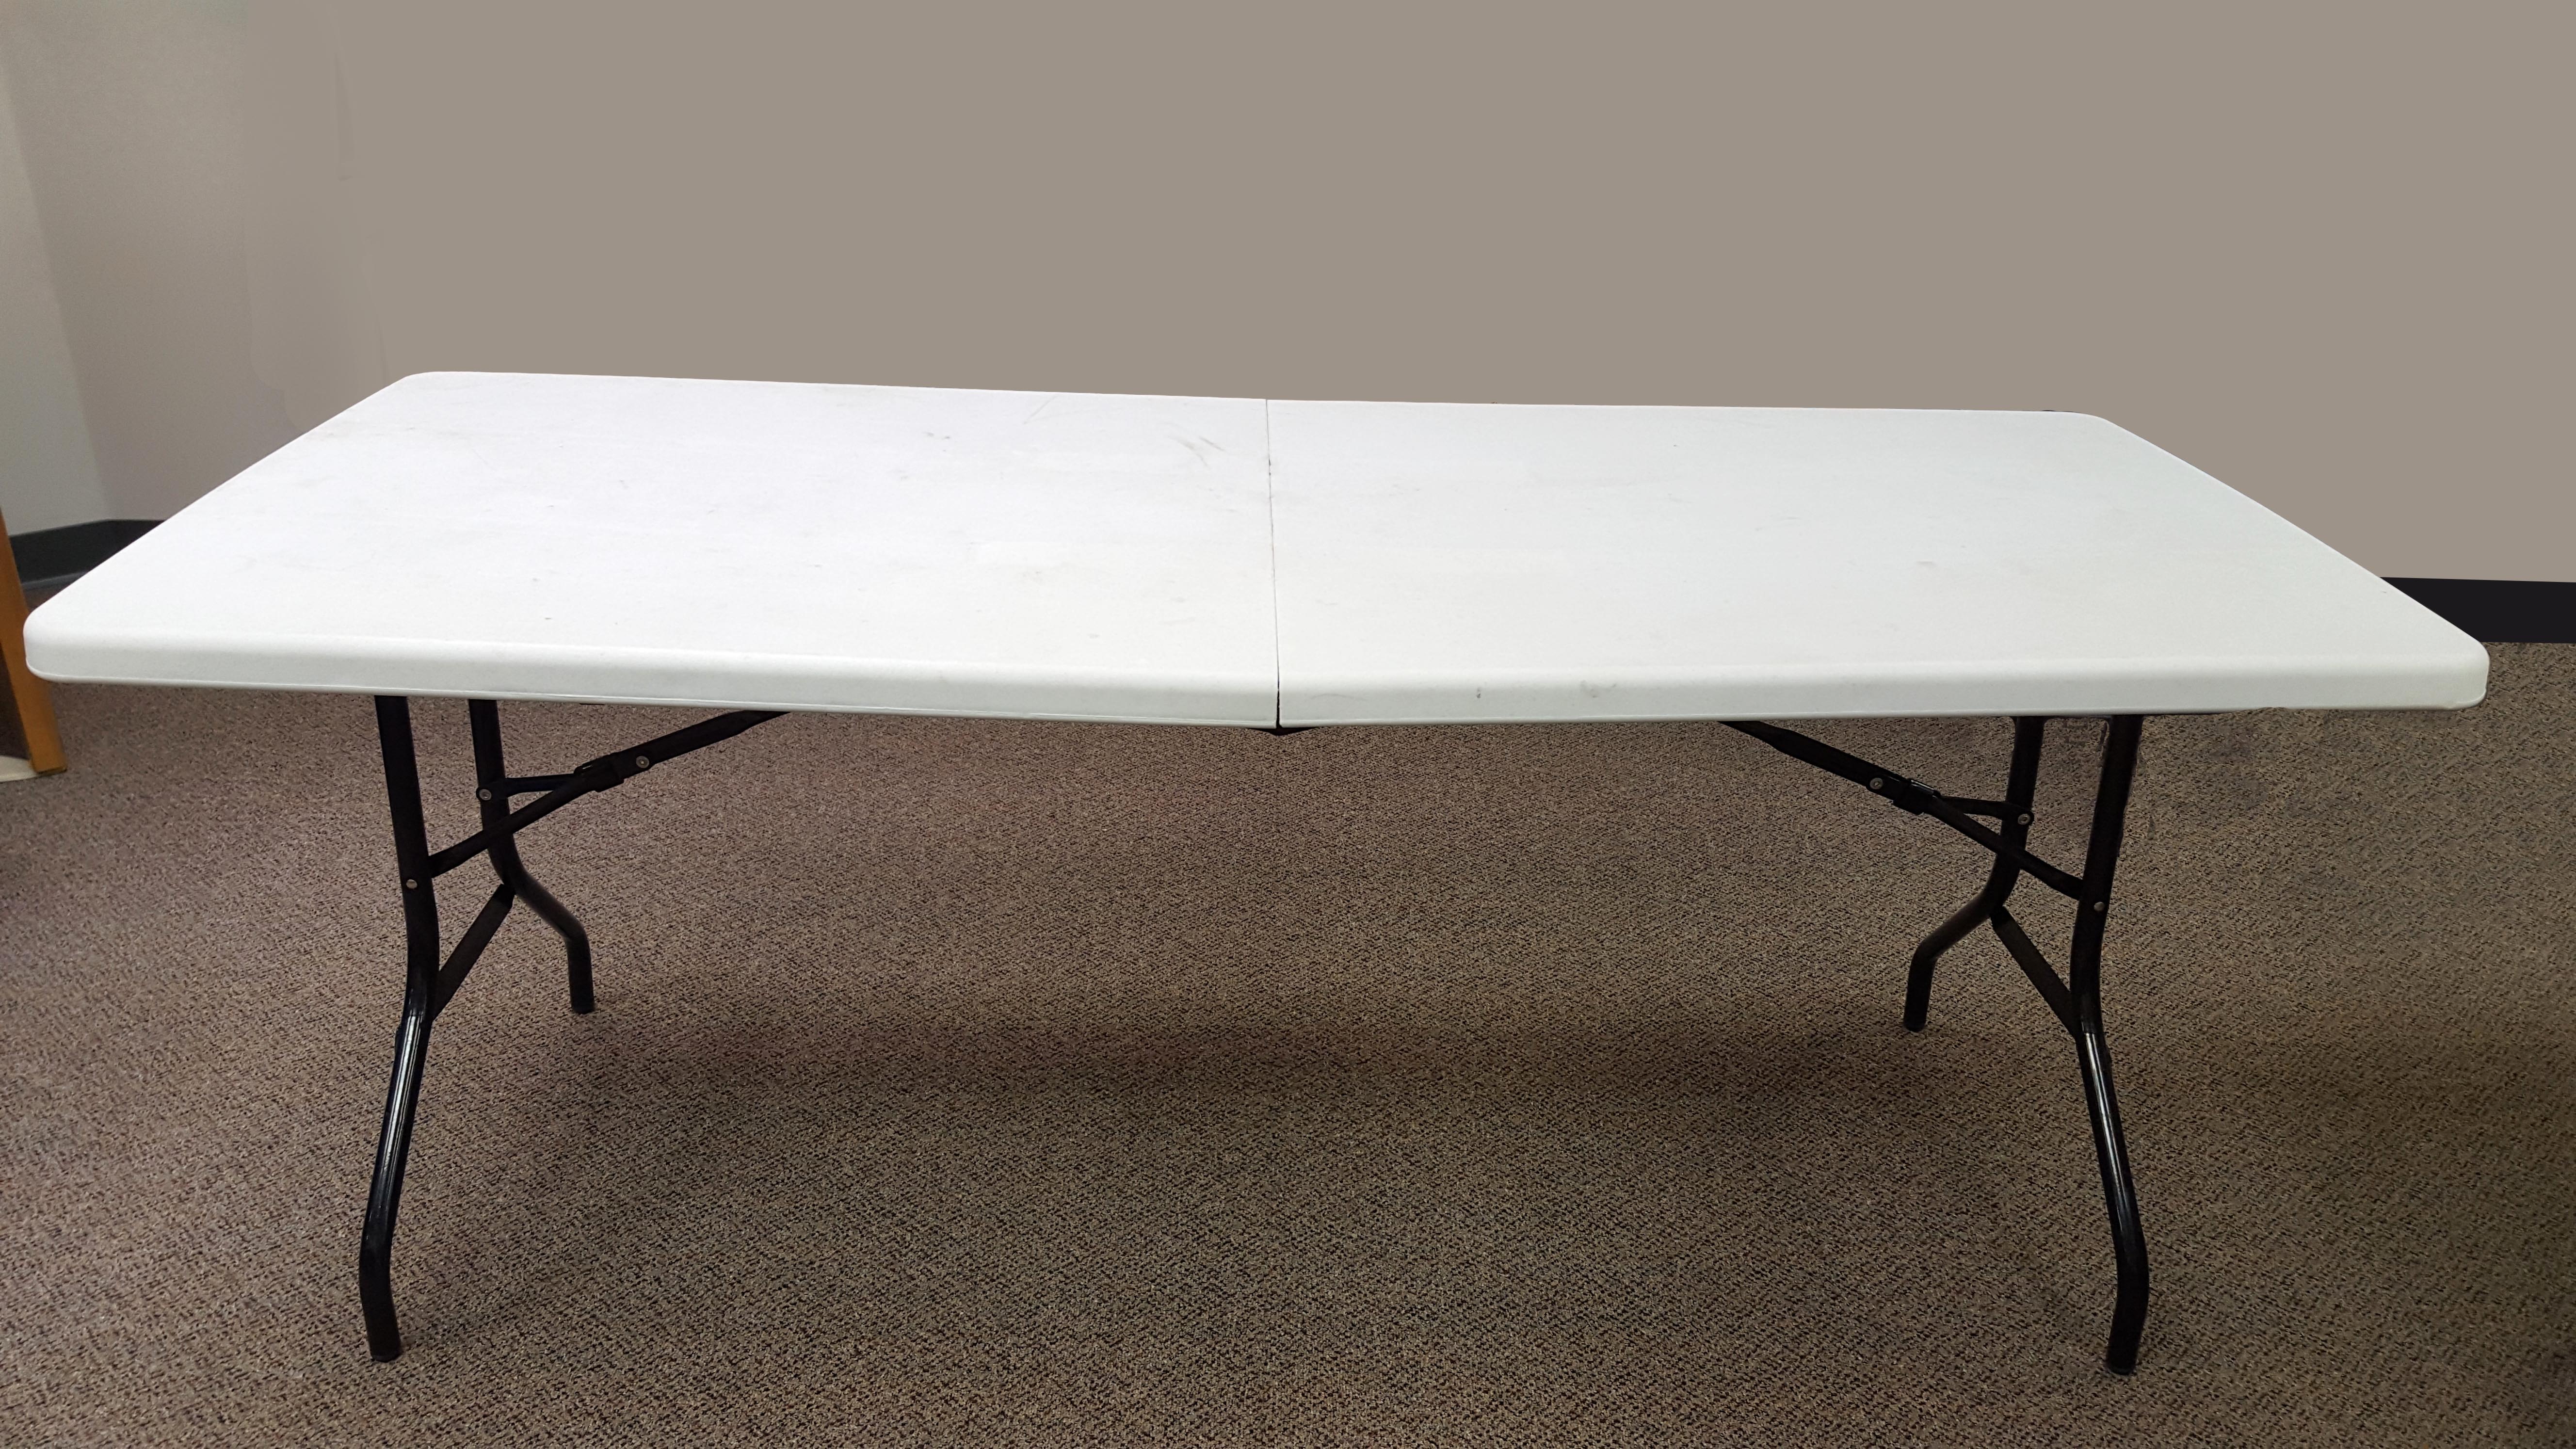 Before-Transform Your Dull, Unsightly Table Into an Attractive Stretch Fabric Covered Surface